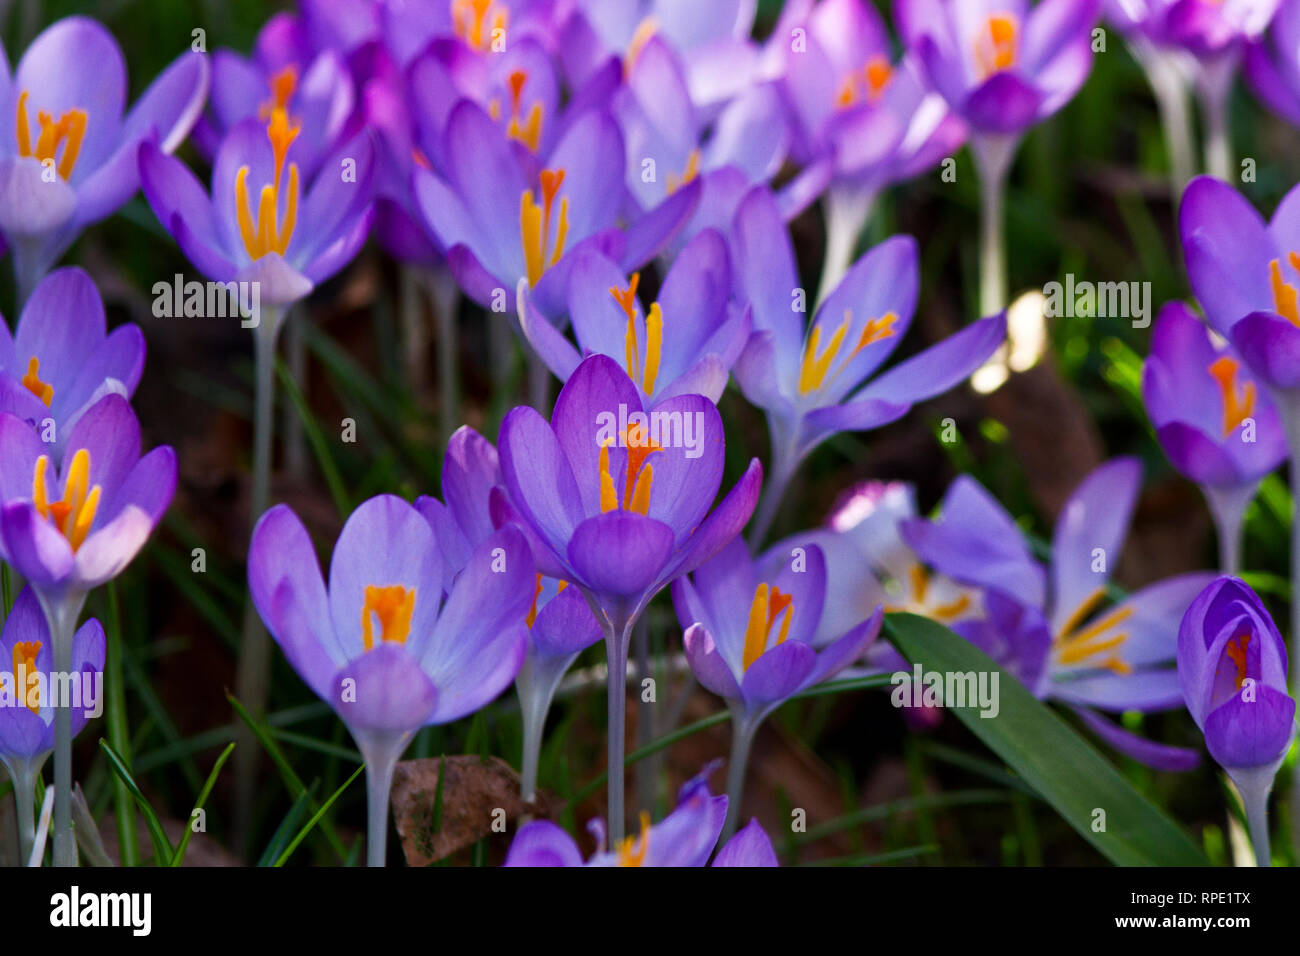 One of the first flowers to burst forth at the end of winter the Crocus brightens up the garden and spirits as a sign that spring is on the way Stock Photo